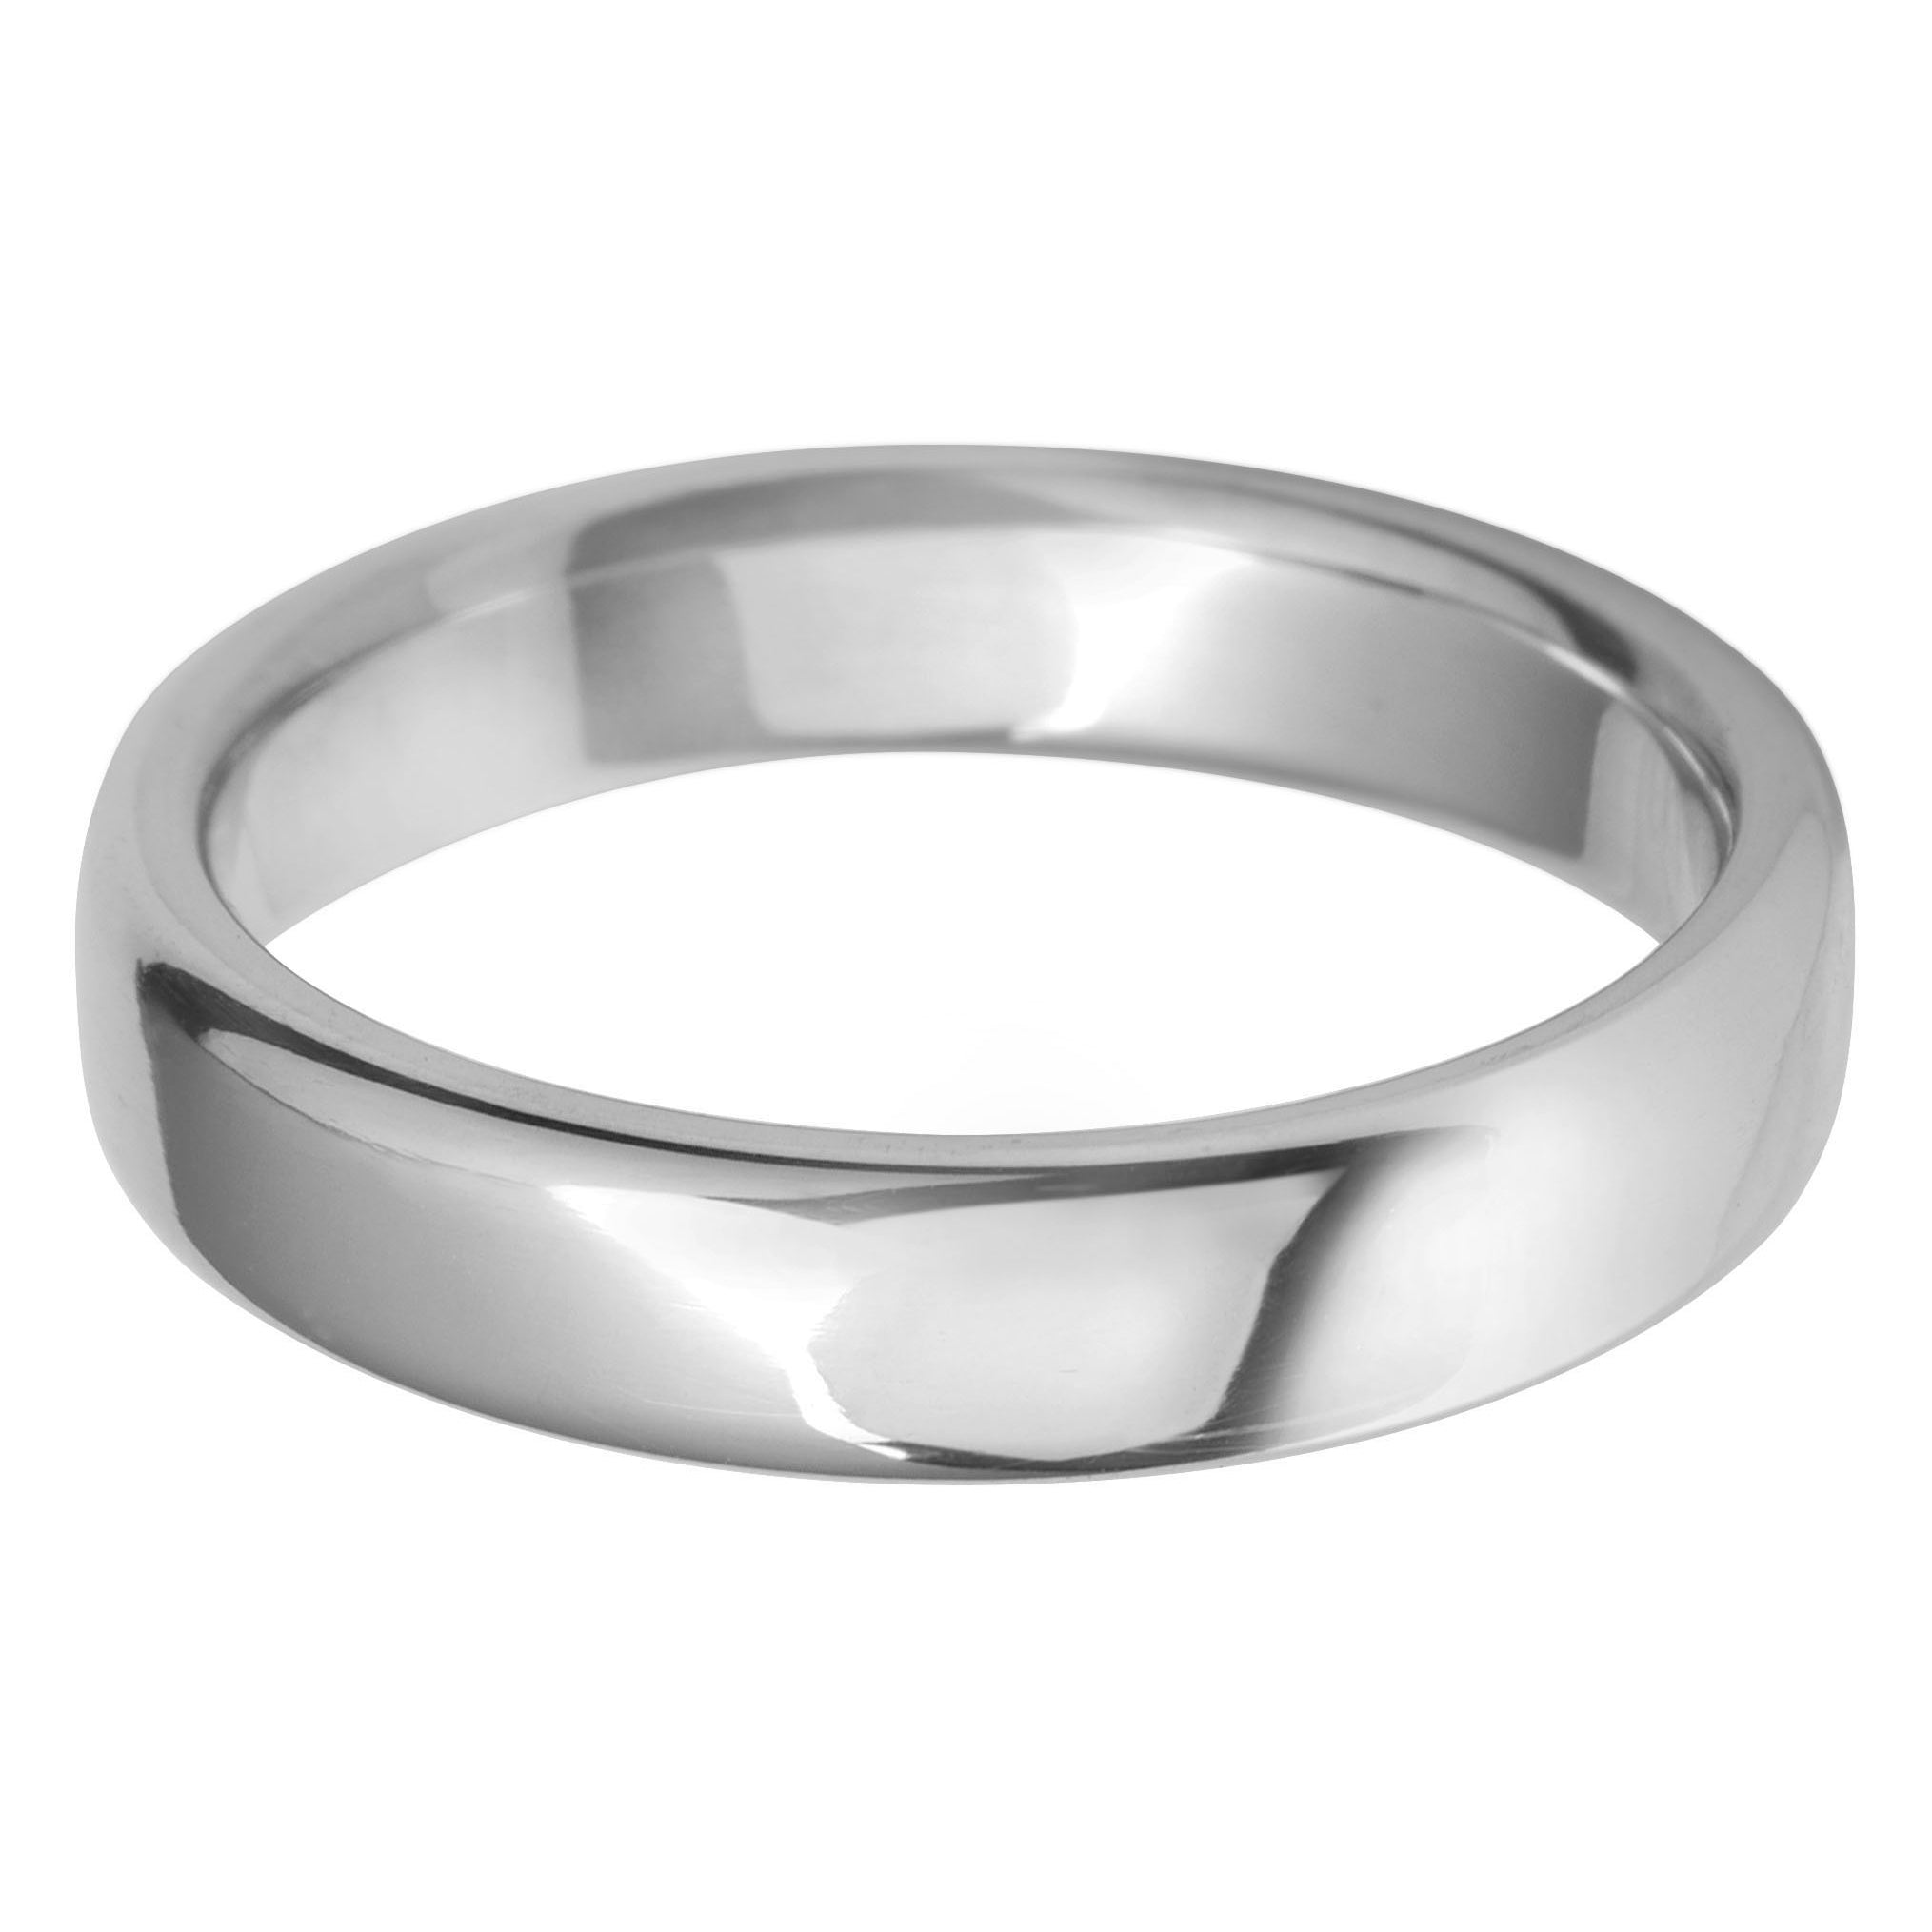 4mm Rounded Flat lightweight Wedding Ring